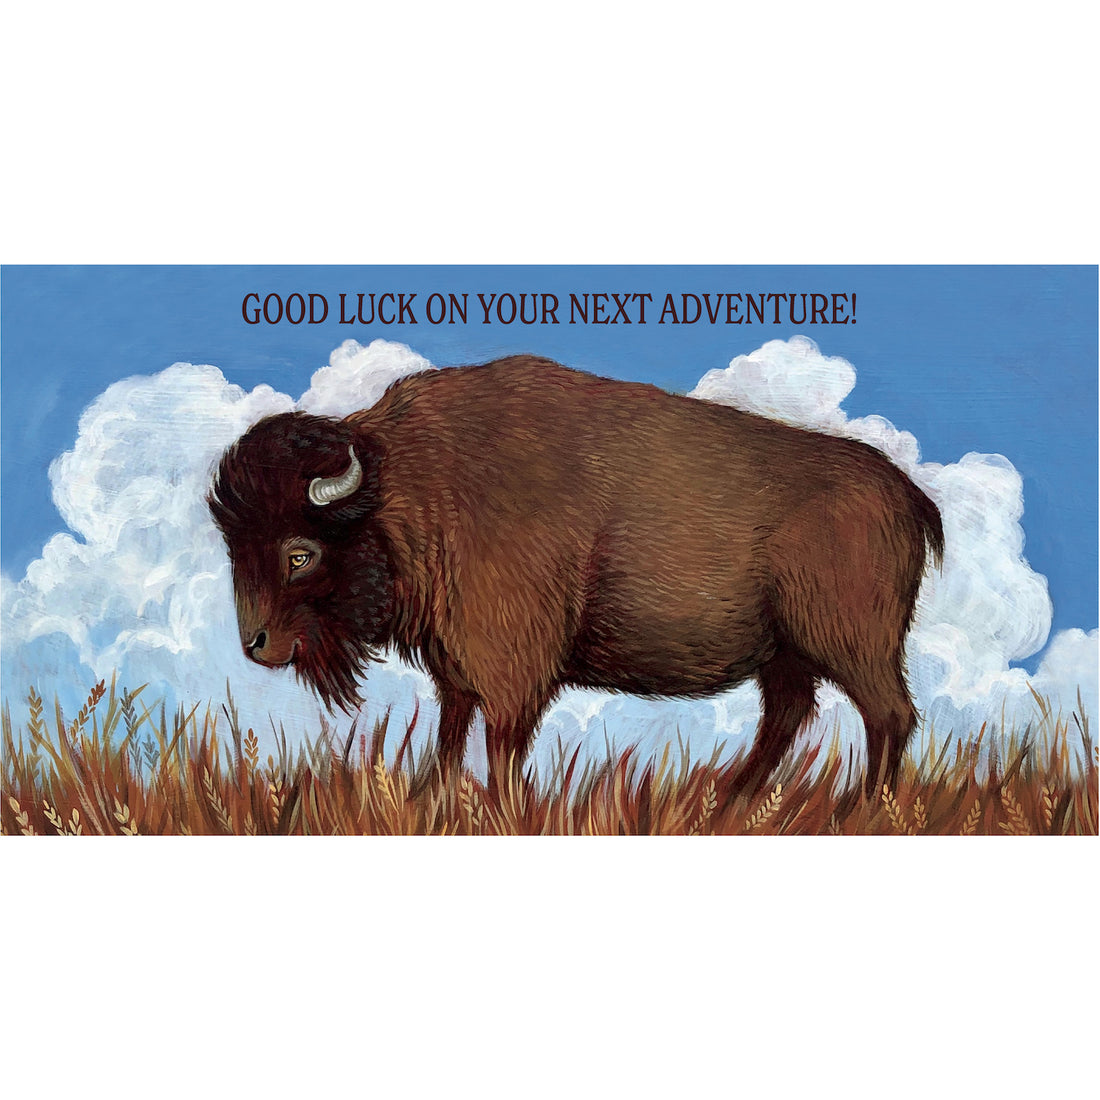 A whimsical illustration of a majestic brown bison, facing left, standing on yellow-tan grass against a blue sky with fluffy white clouds.